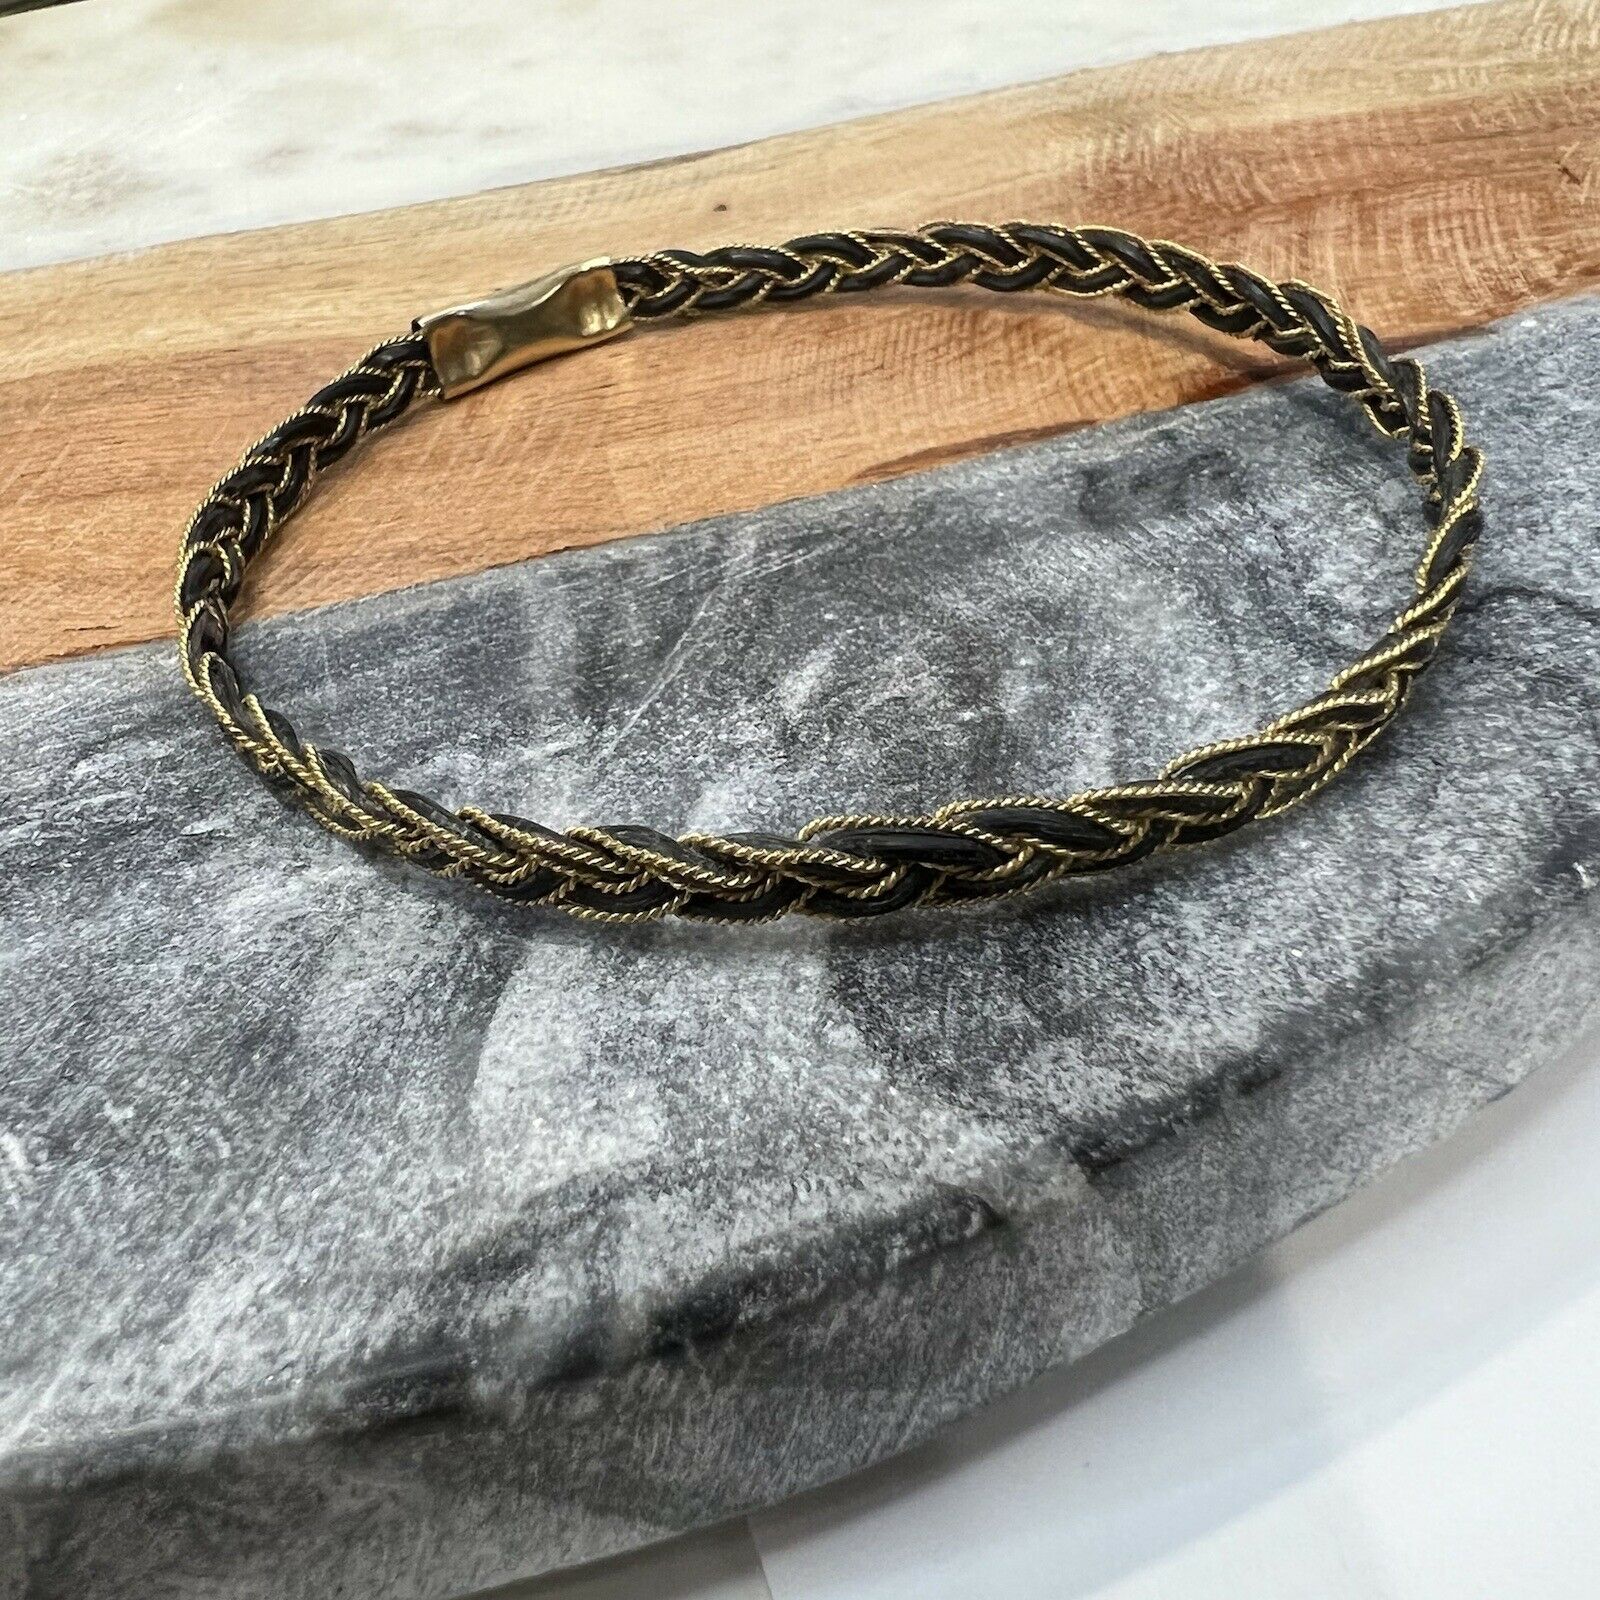 Solid 10K Yellow Gold and Hair Antique Bangle Slip-on Bracelet 7.8"